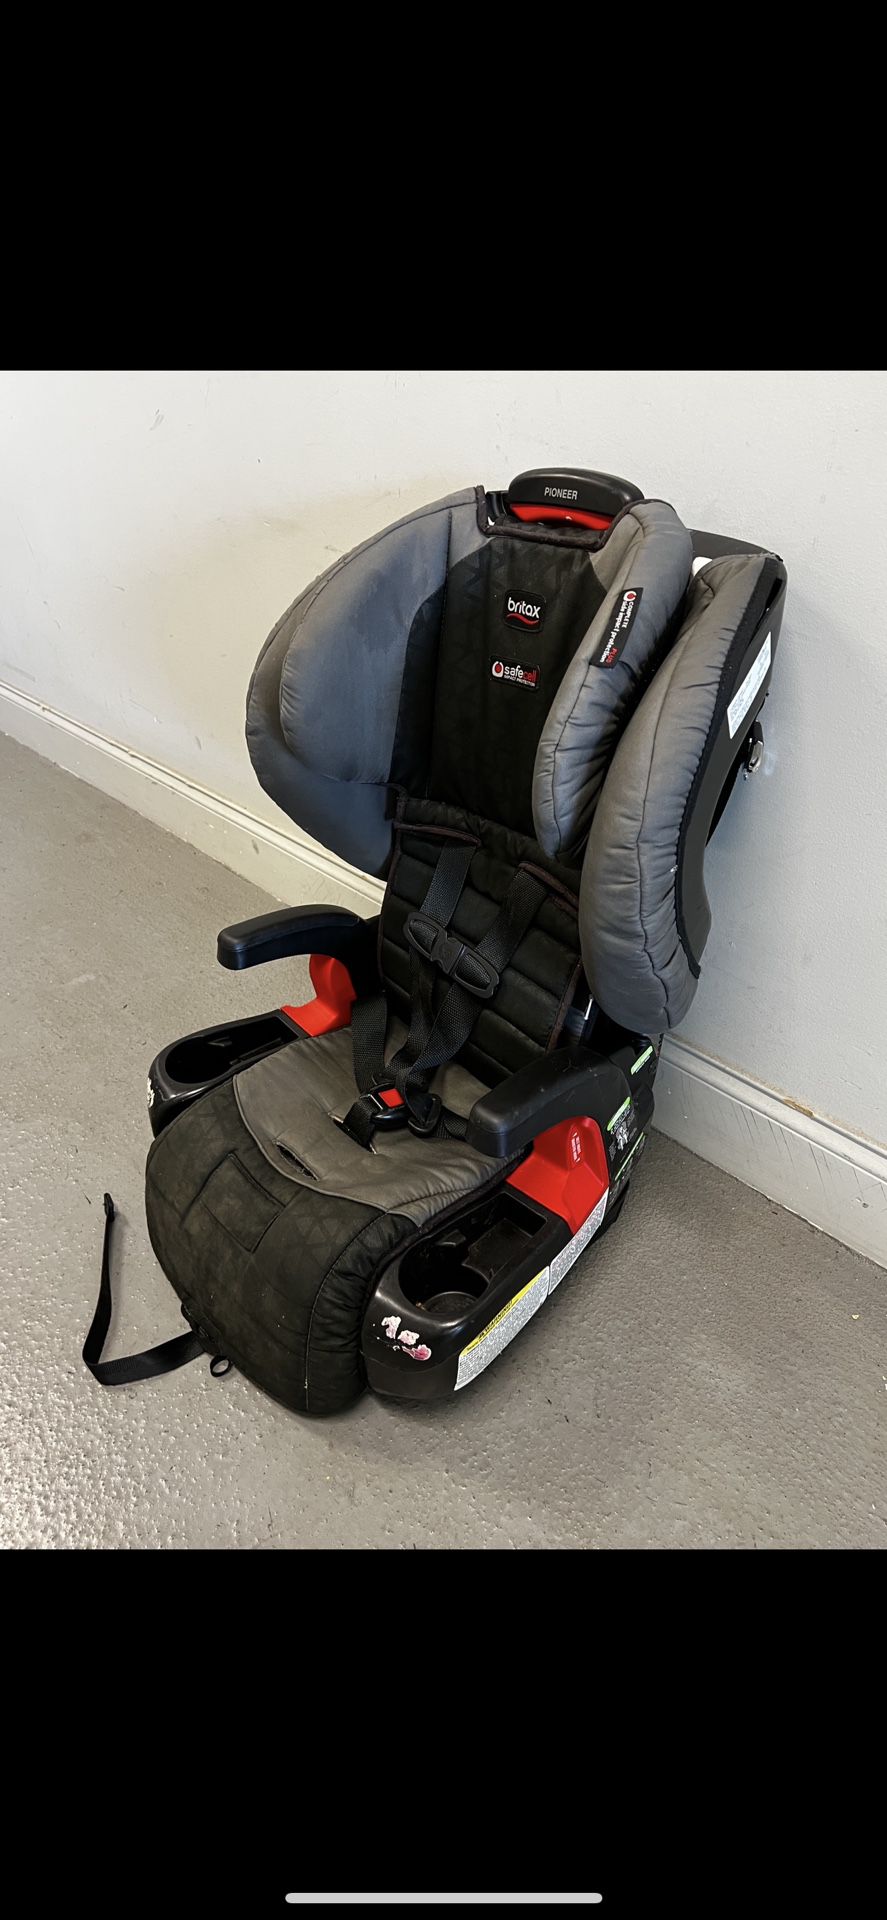 BRITAX Pioneer Harness-2-Booster Car Seat EXPIRES IN 2025 (Good condition) PICK UP IN CORNELIUS